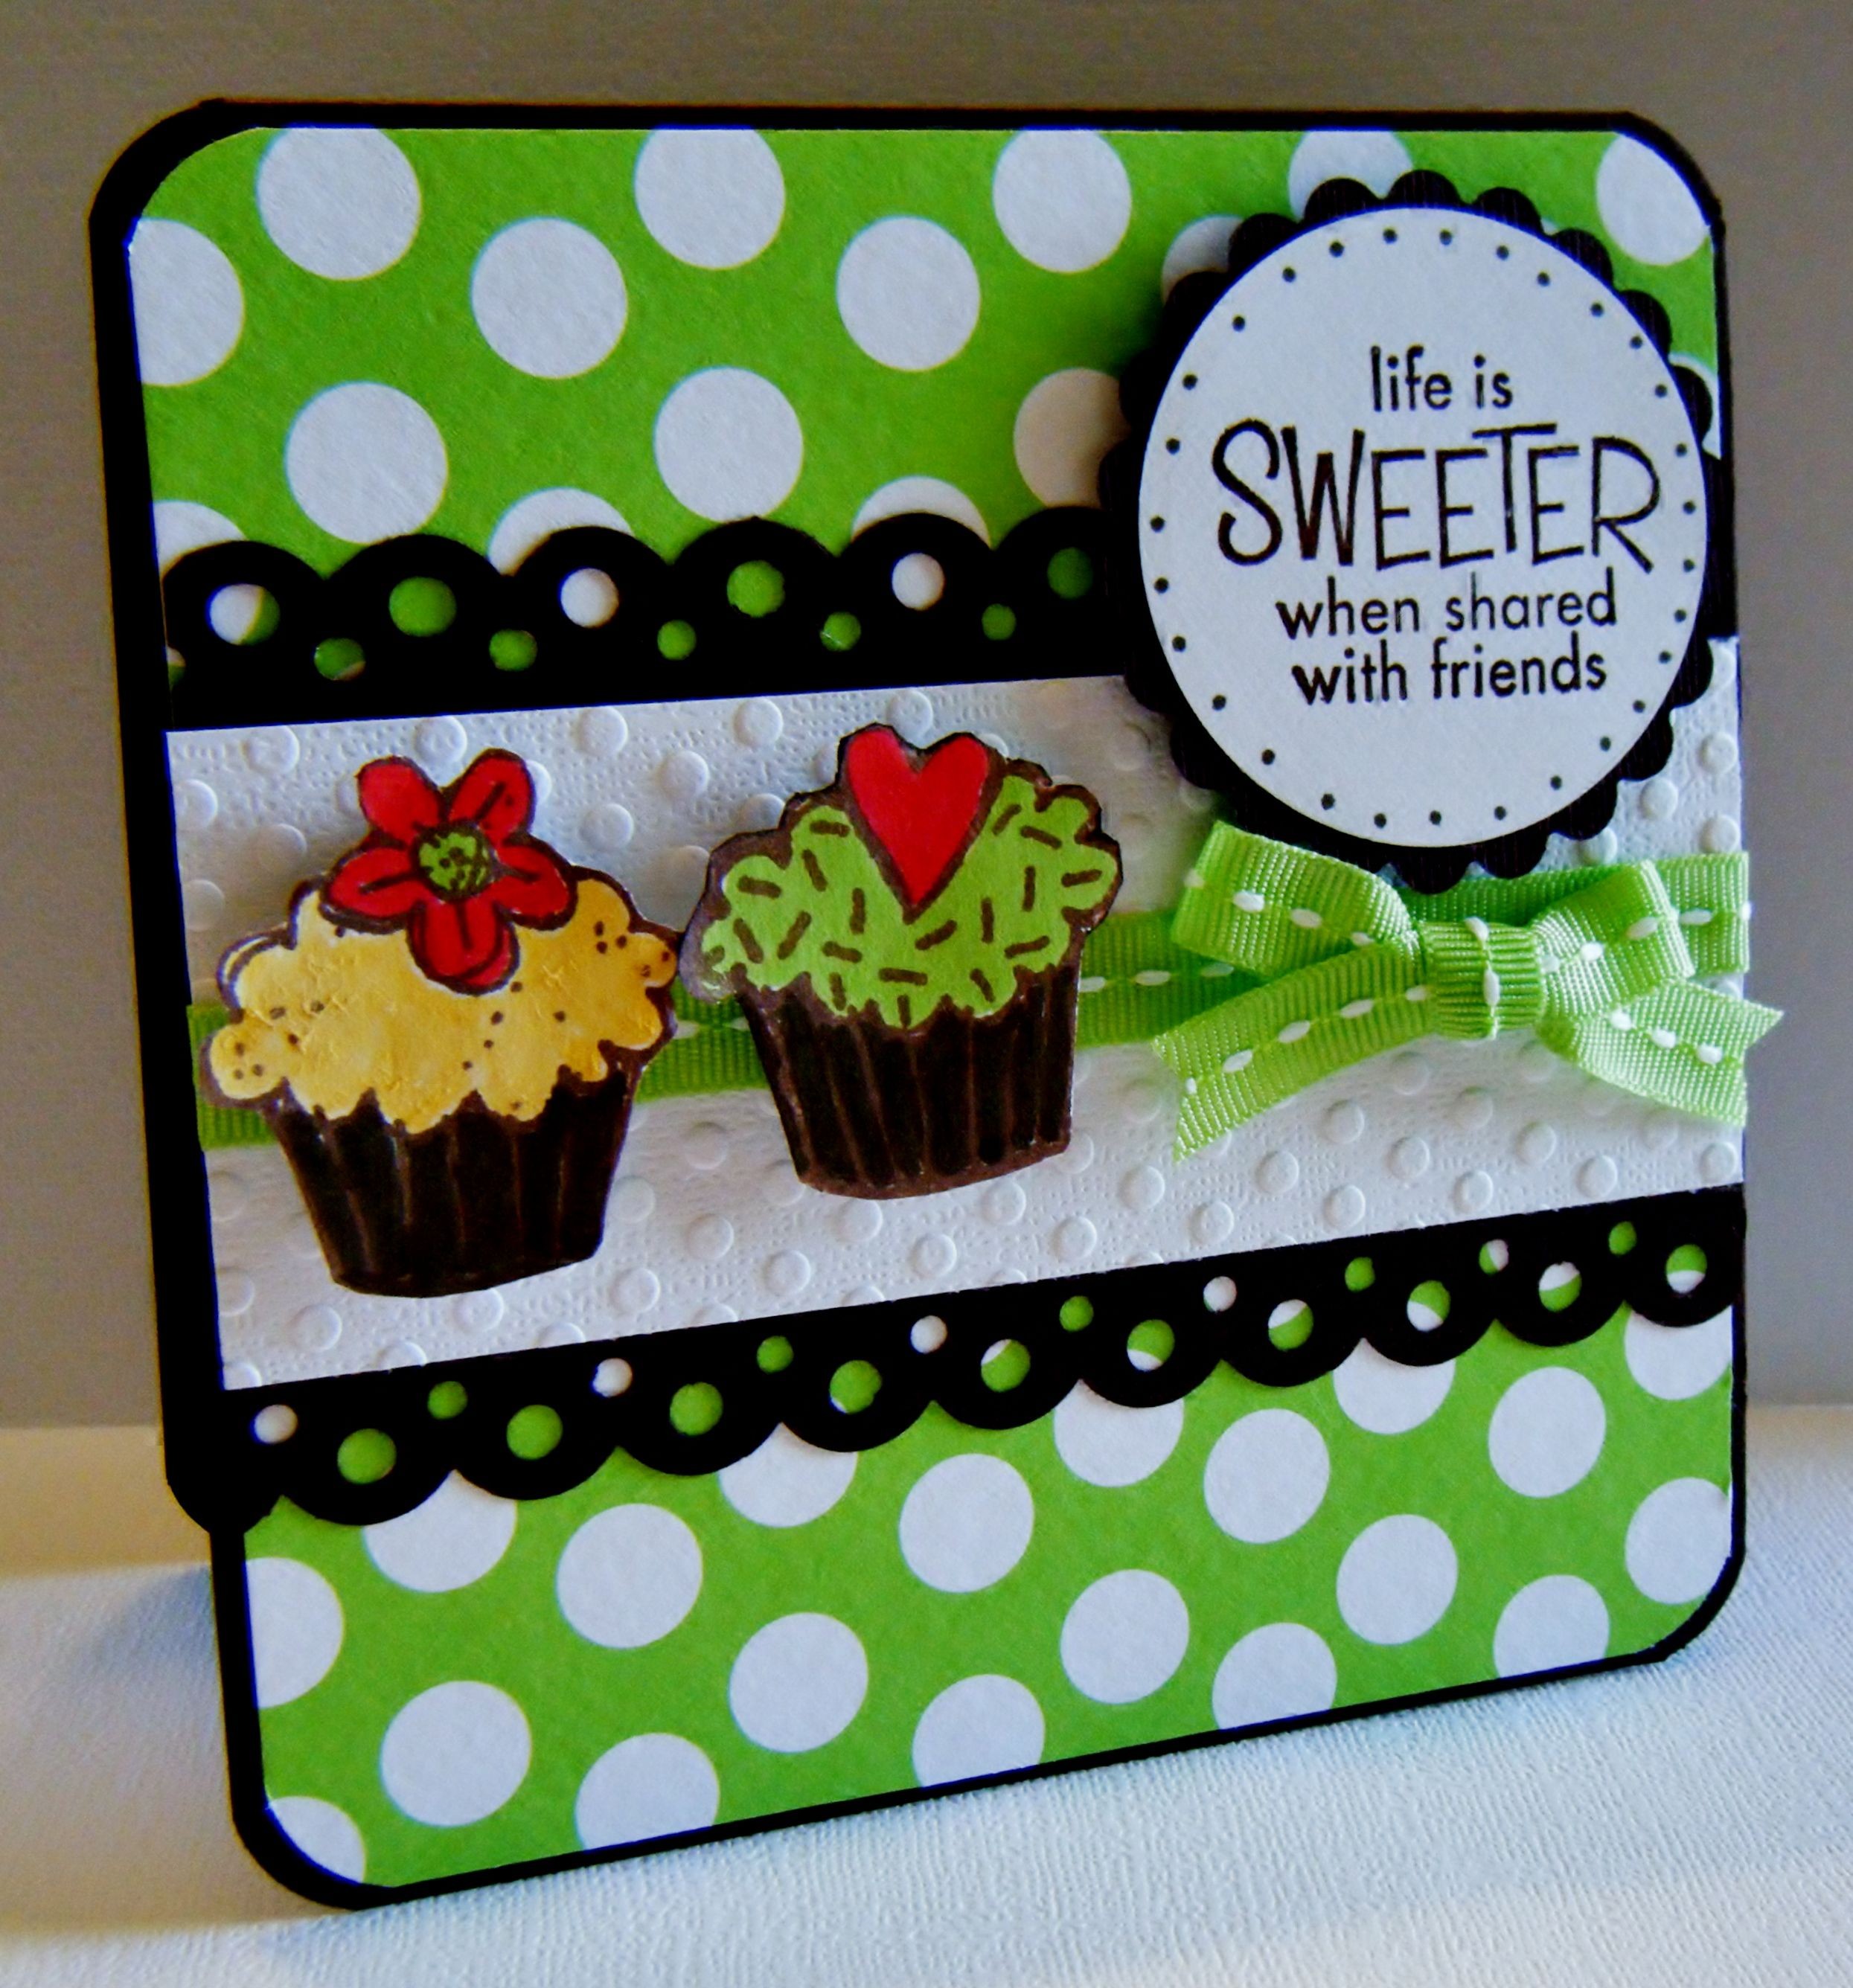 Papercraft Cupcake Life is Sweeter Scrapbook Created by Lisa Young